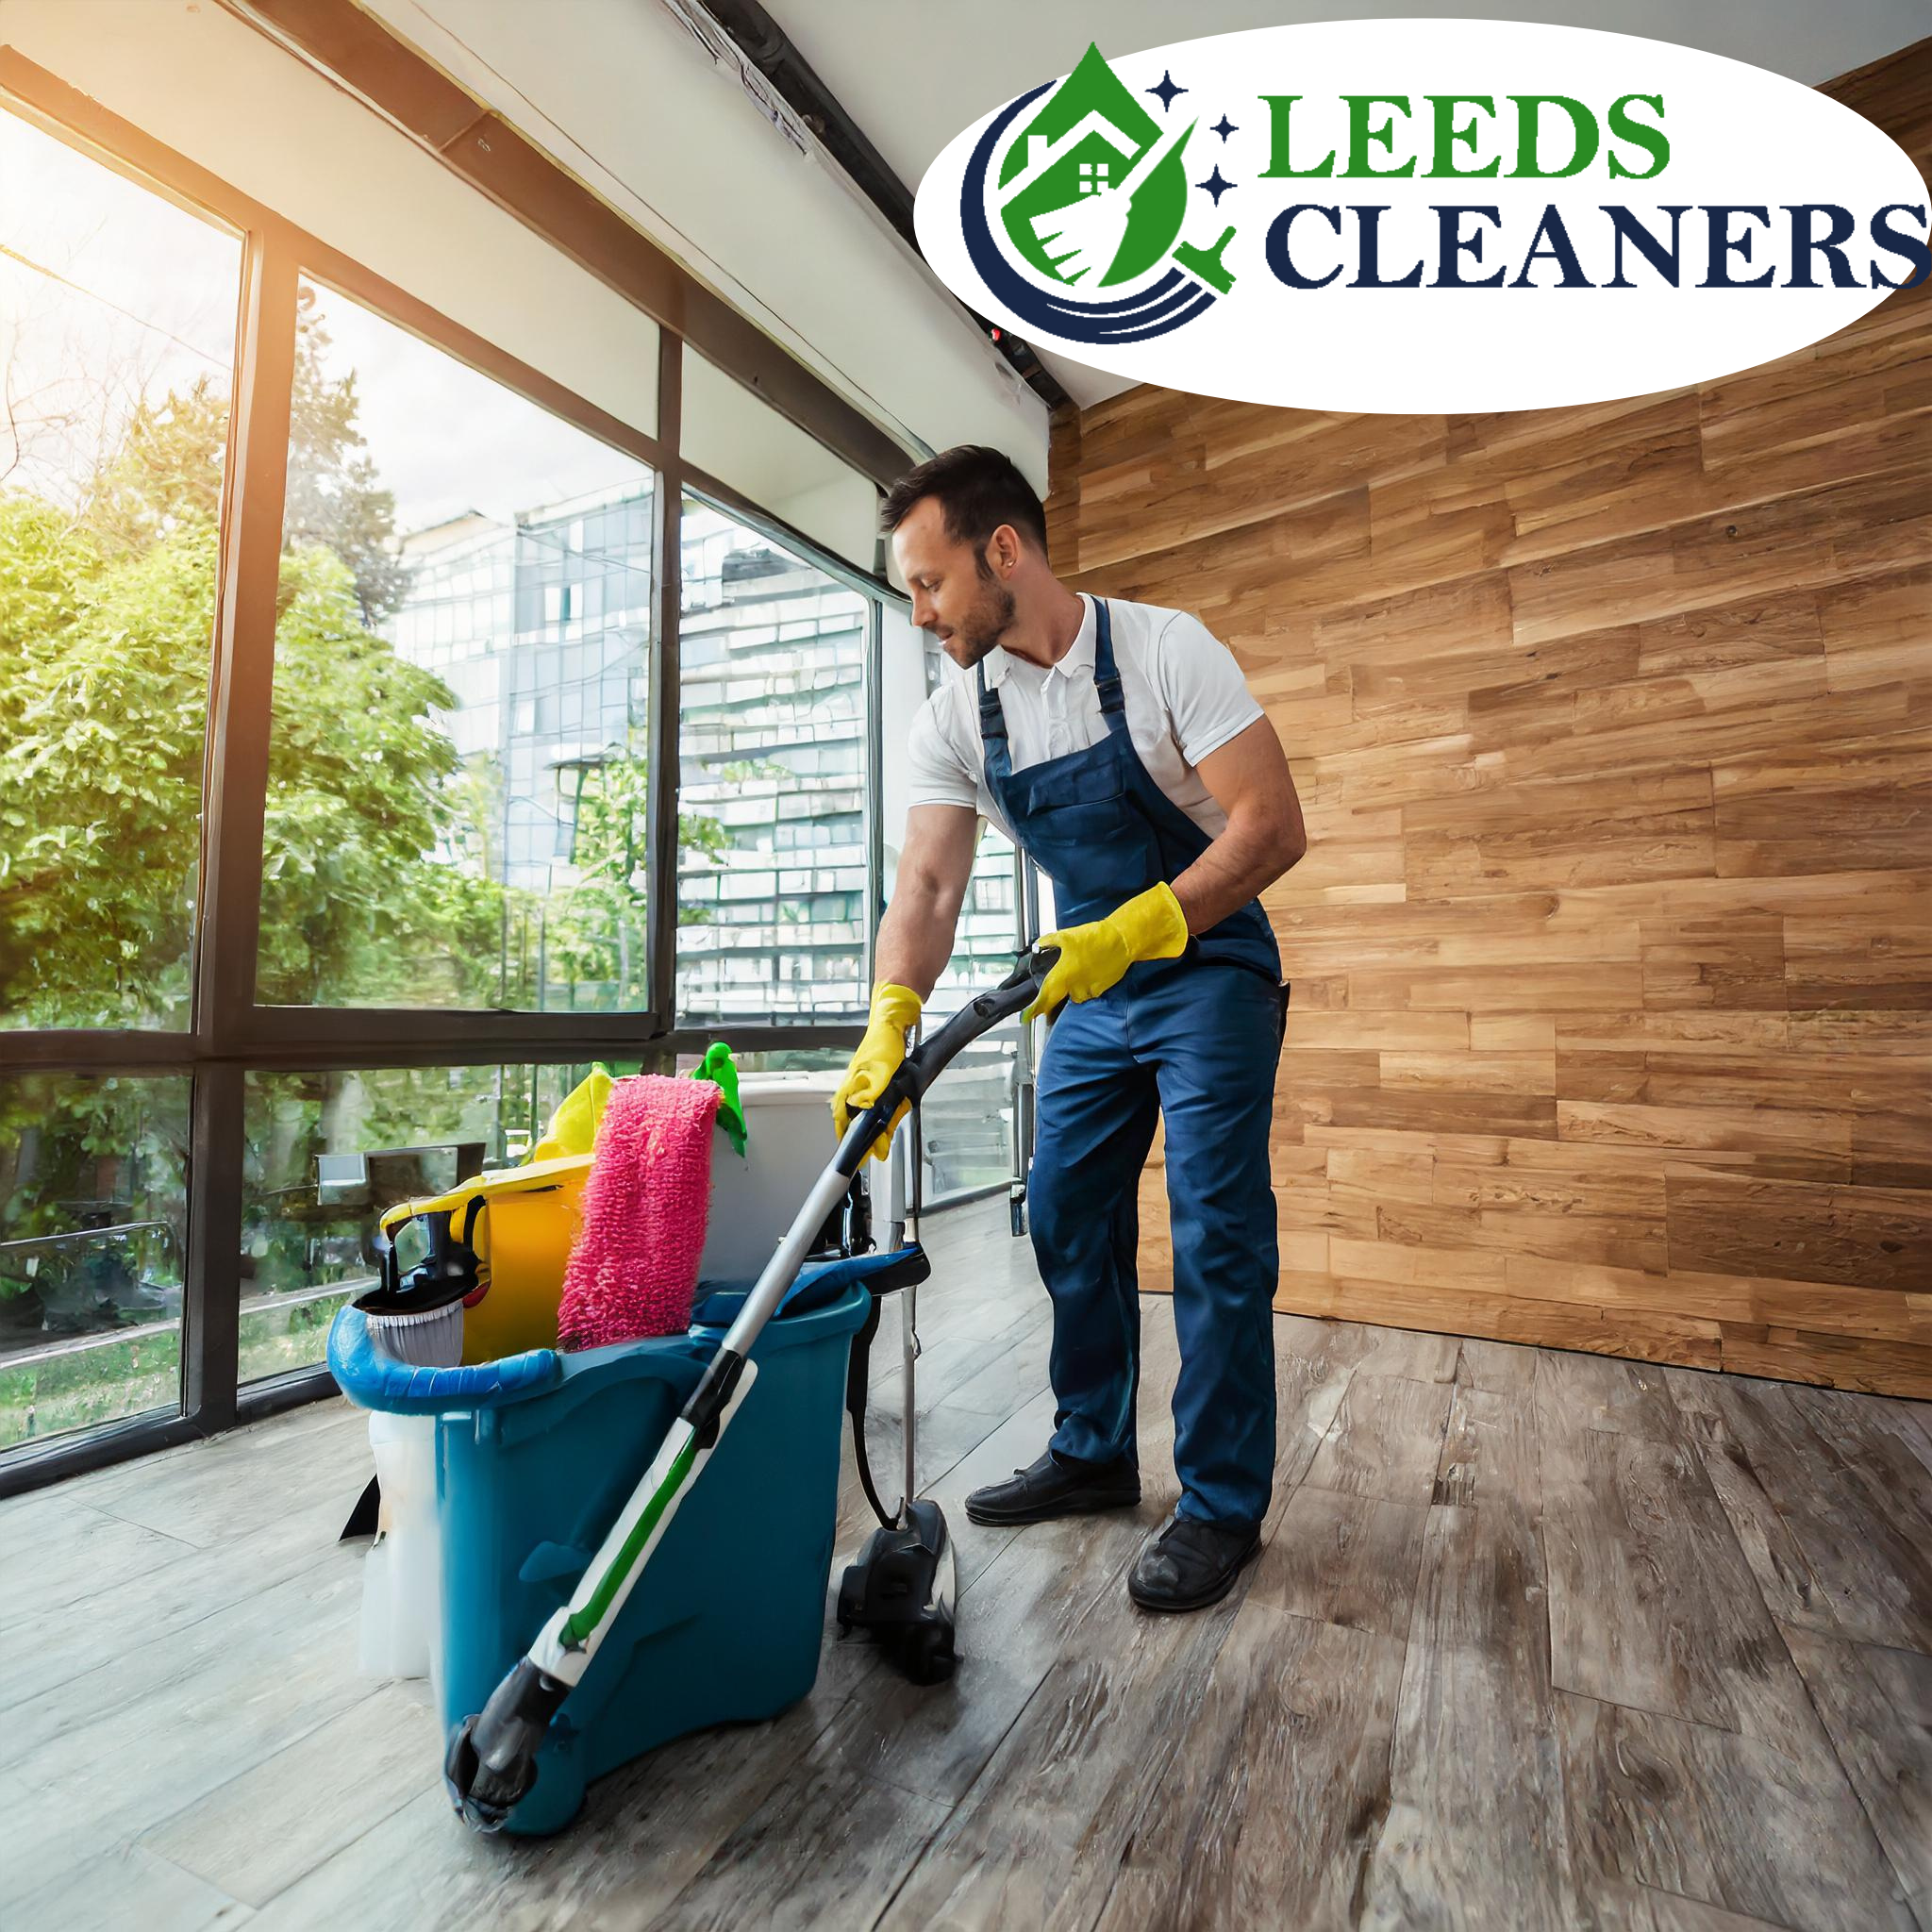 Leeds Cleaners Launches Premier Airbnb Cleaning Service in Leeds to Elevate Guest Experiences